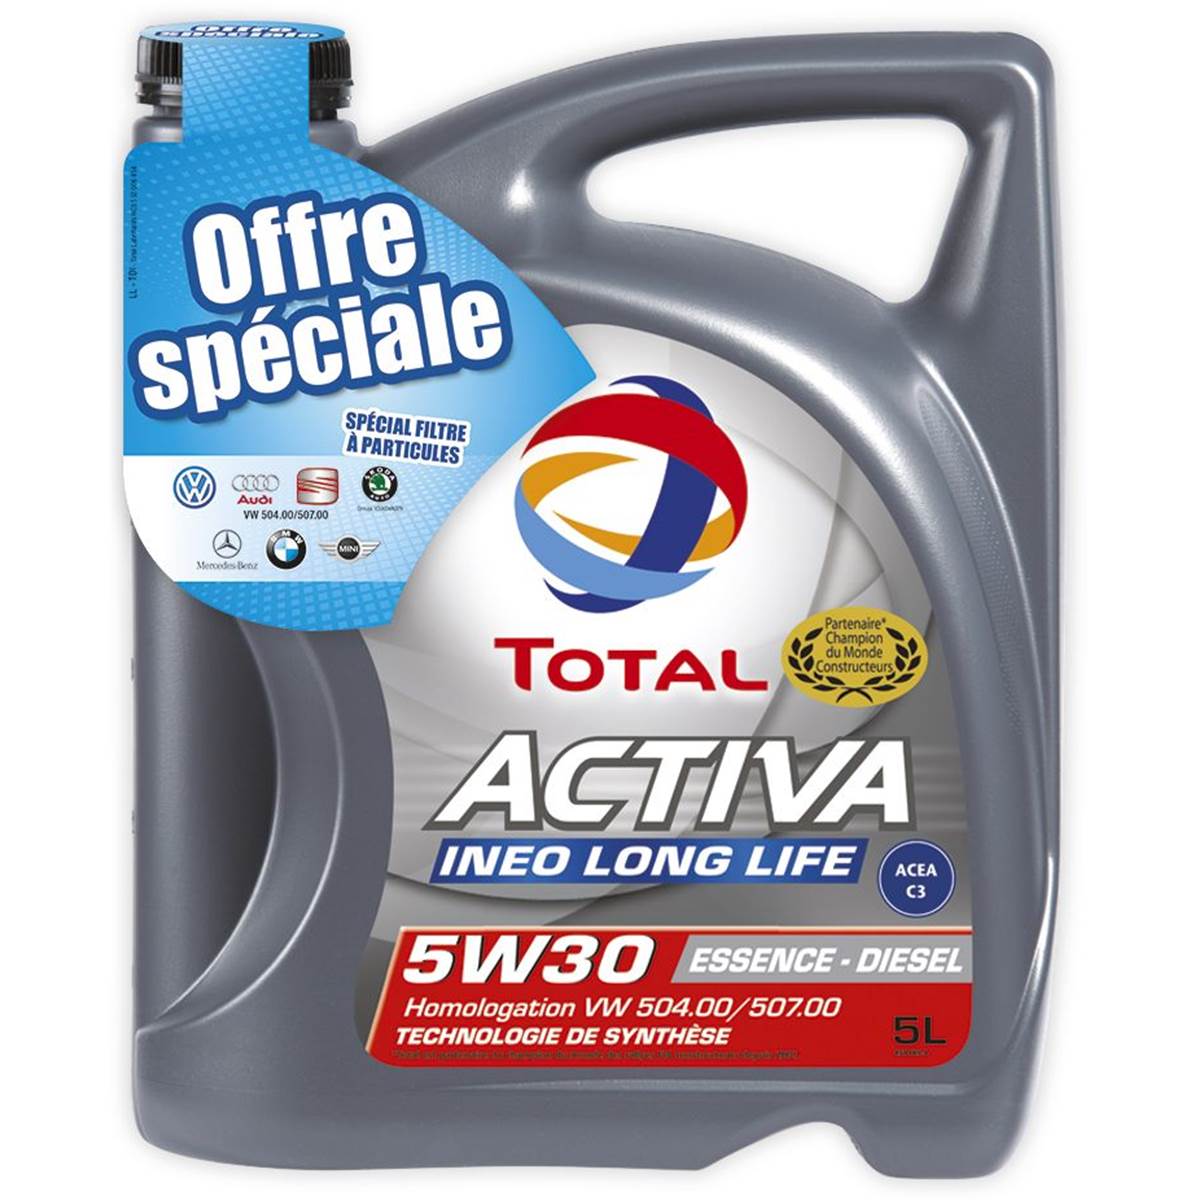 Huile Moteur Total Activa Ineo Long Life Essence/diesel 5w30 5l